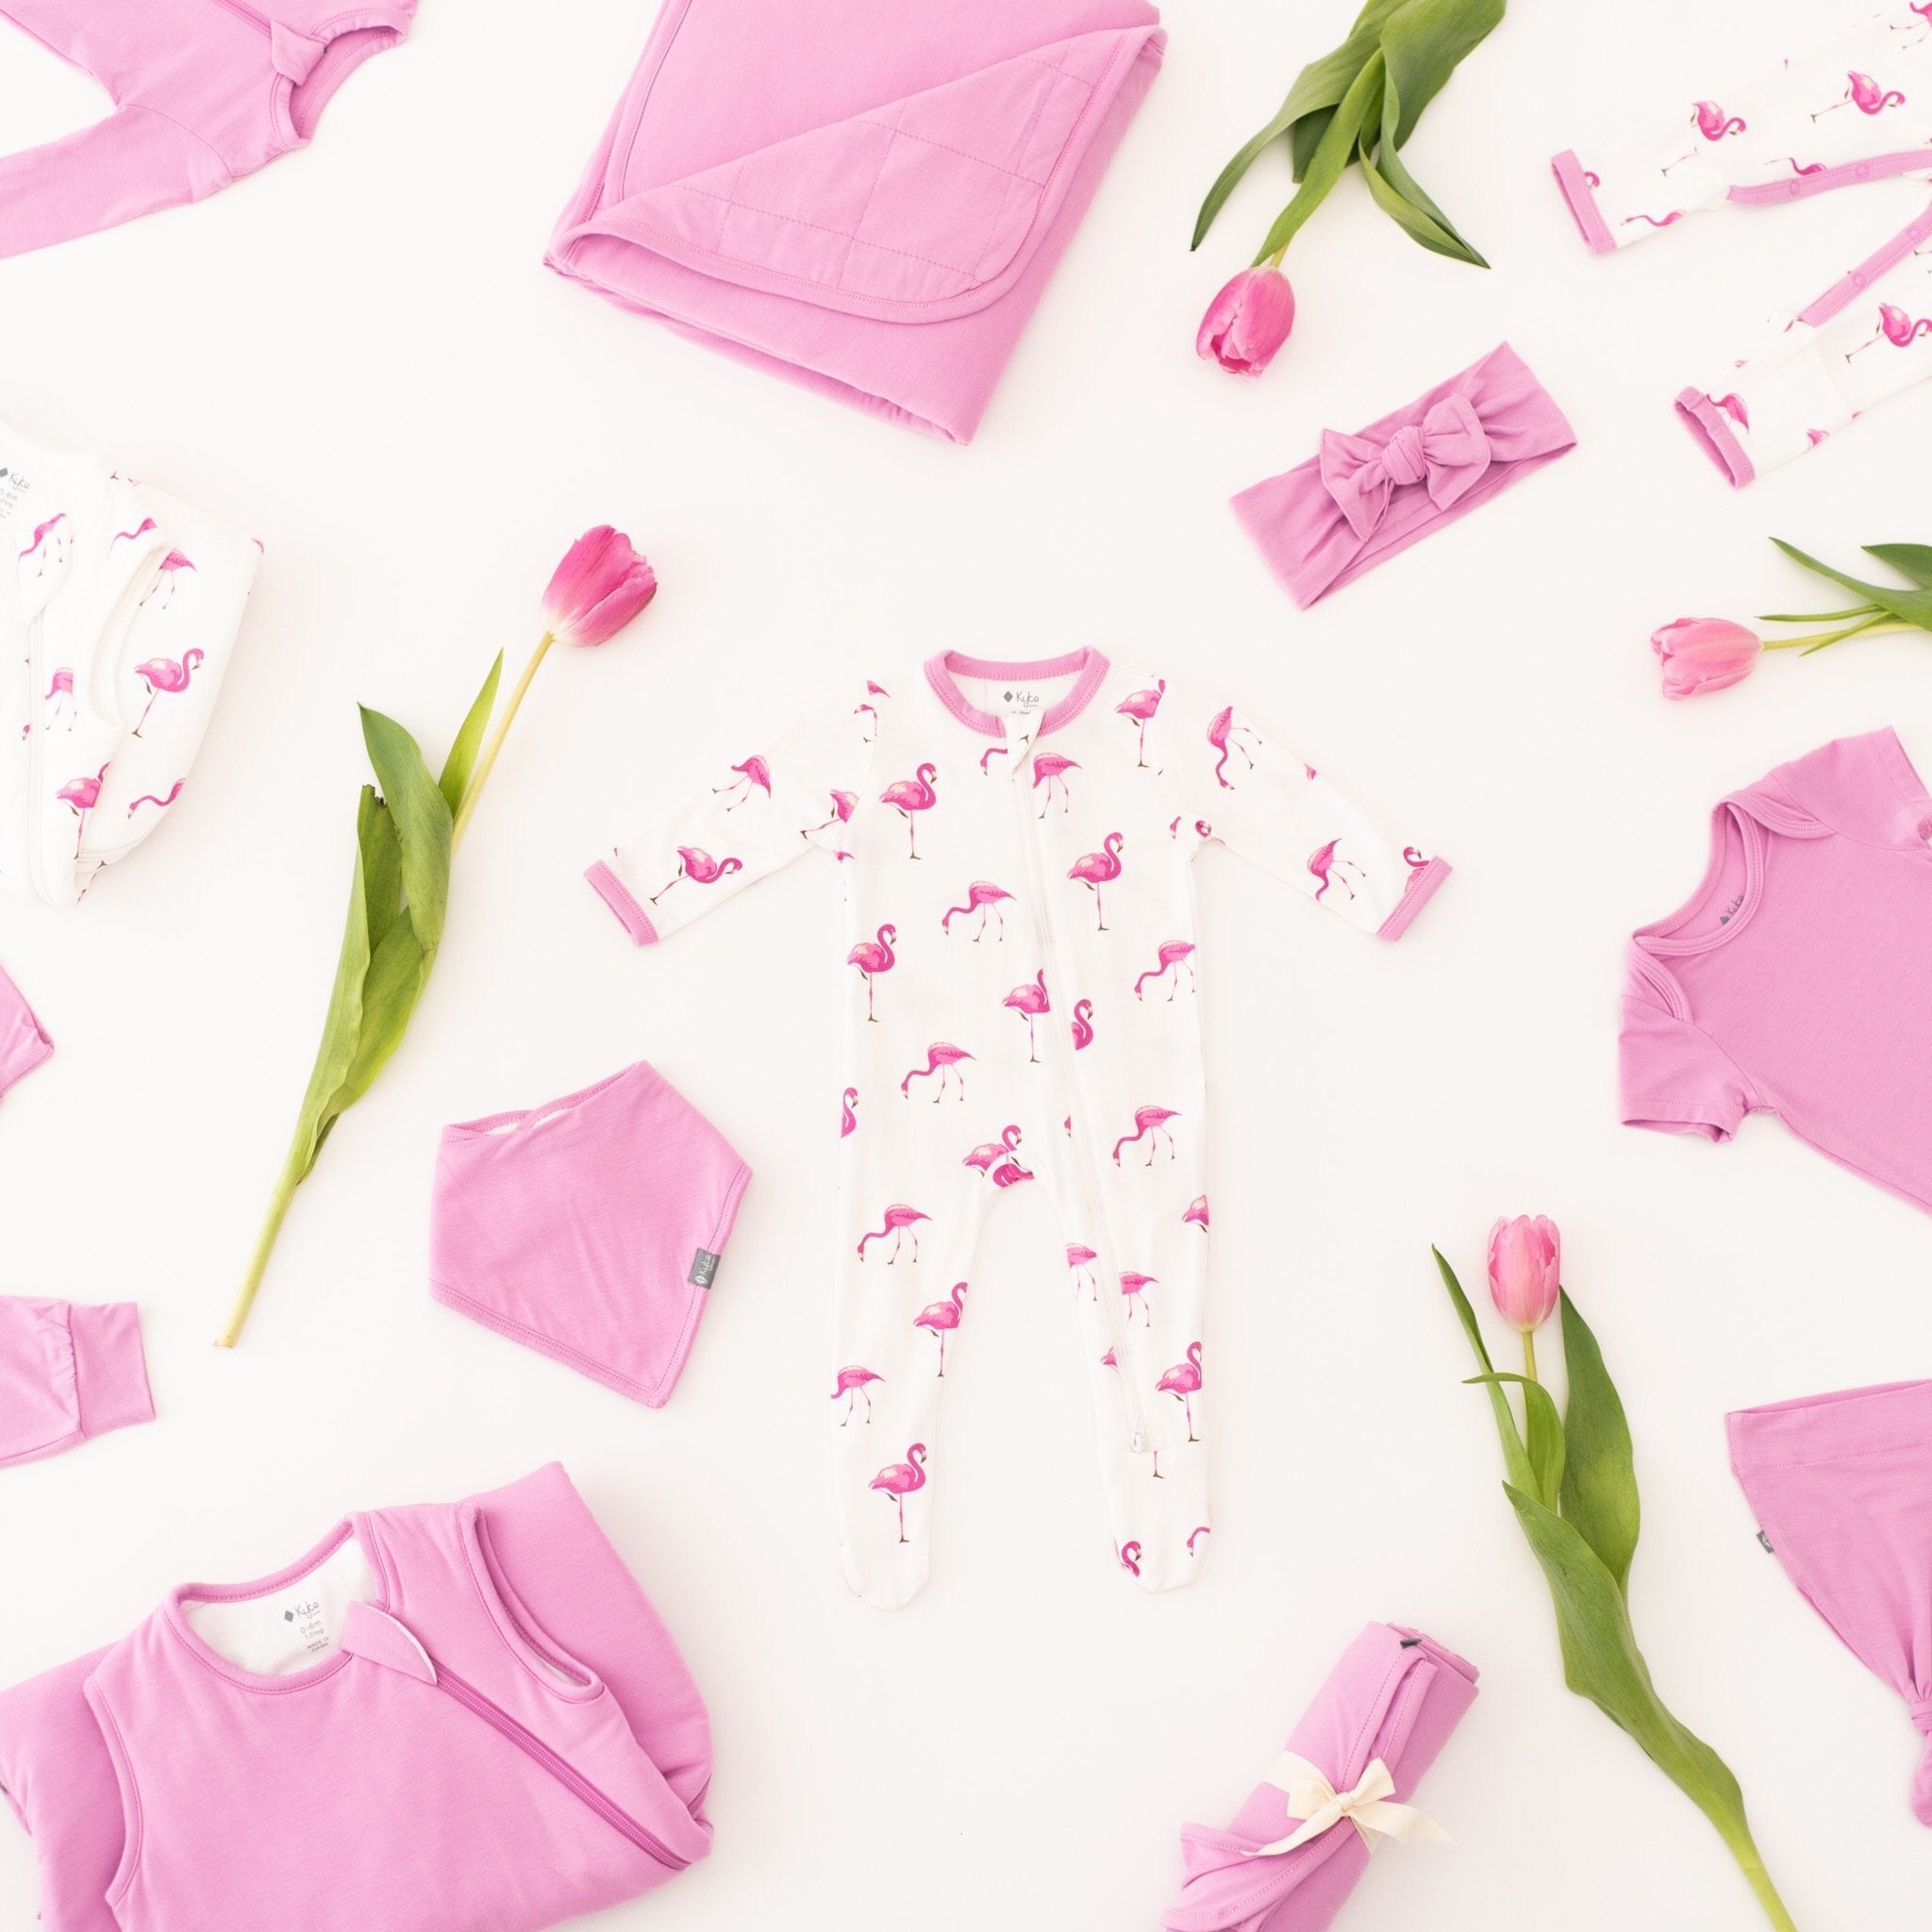 Bubblegum and Flamingo Apparel Pieces Laying in Random Formation